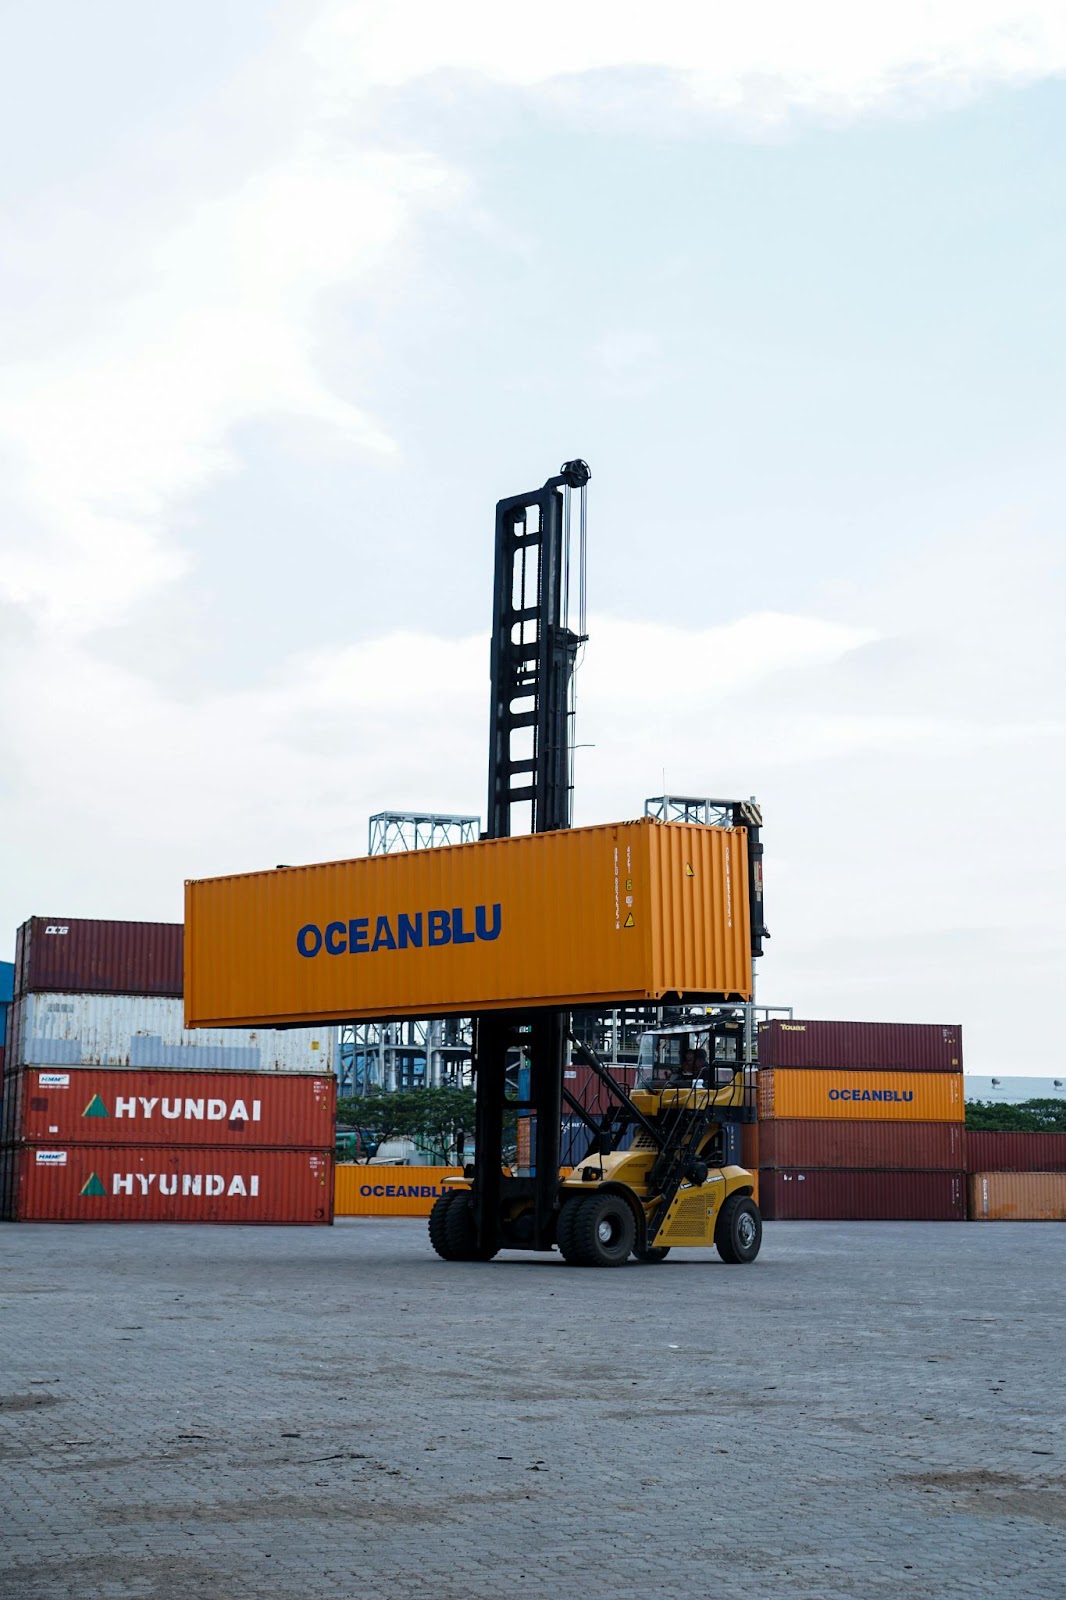 An industrial forklift carrying and stabilizing a shipyard crate